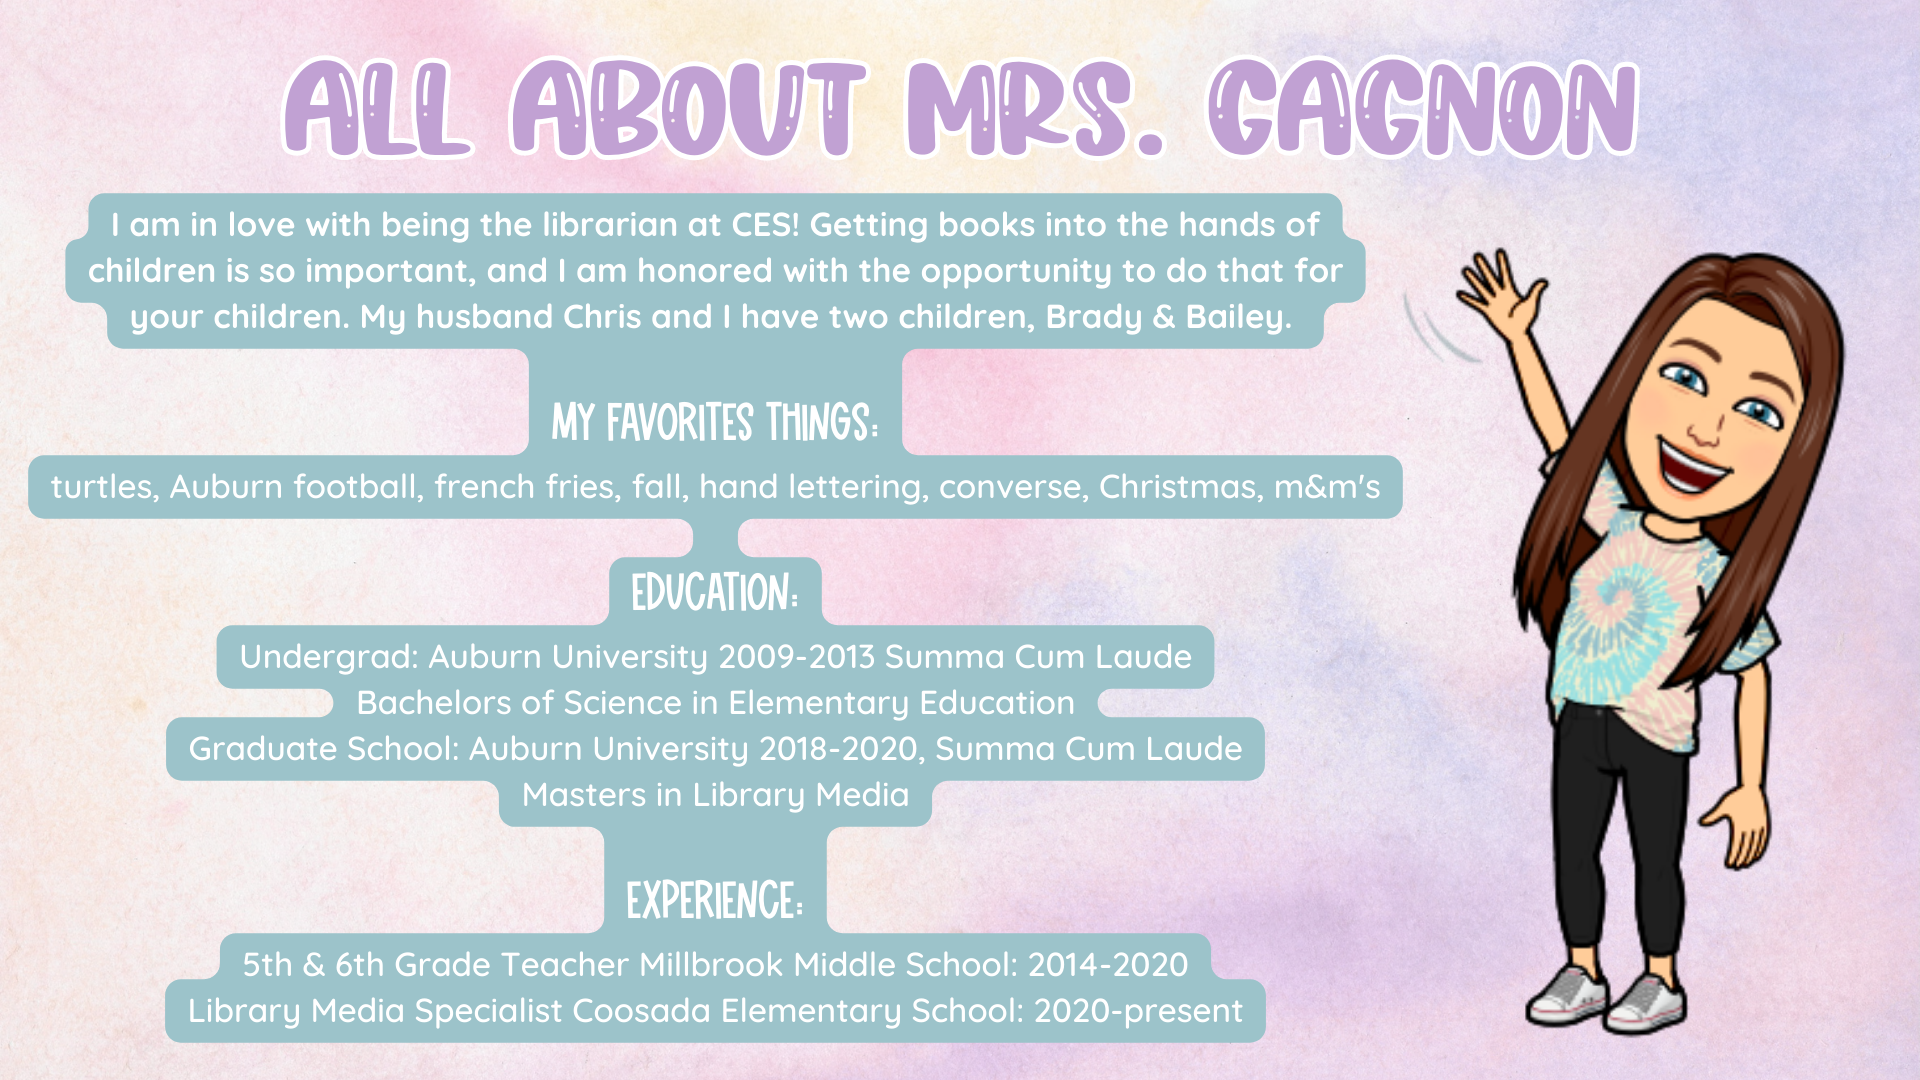 All About Mrs. Gagnon